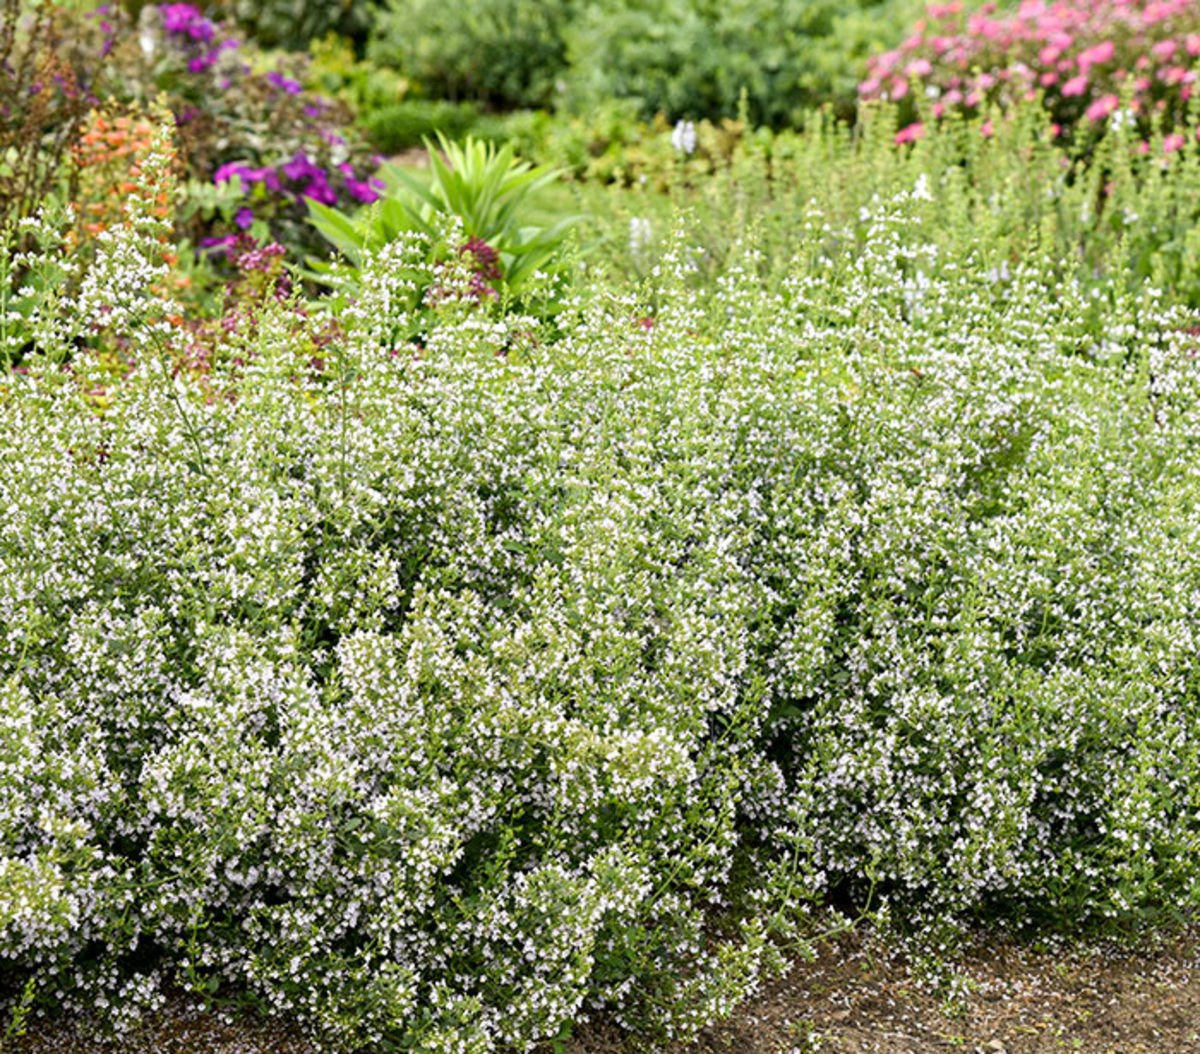 Lesser calamint is a low, bushy perennial with profuse white flowers throughout summer until the frost.